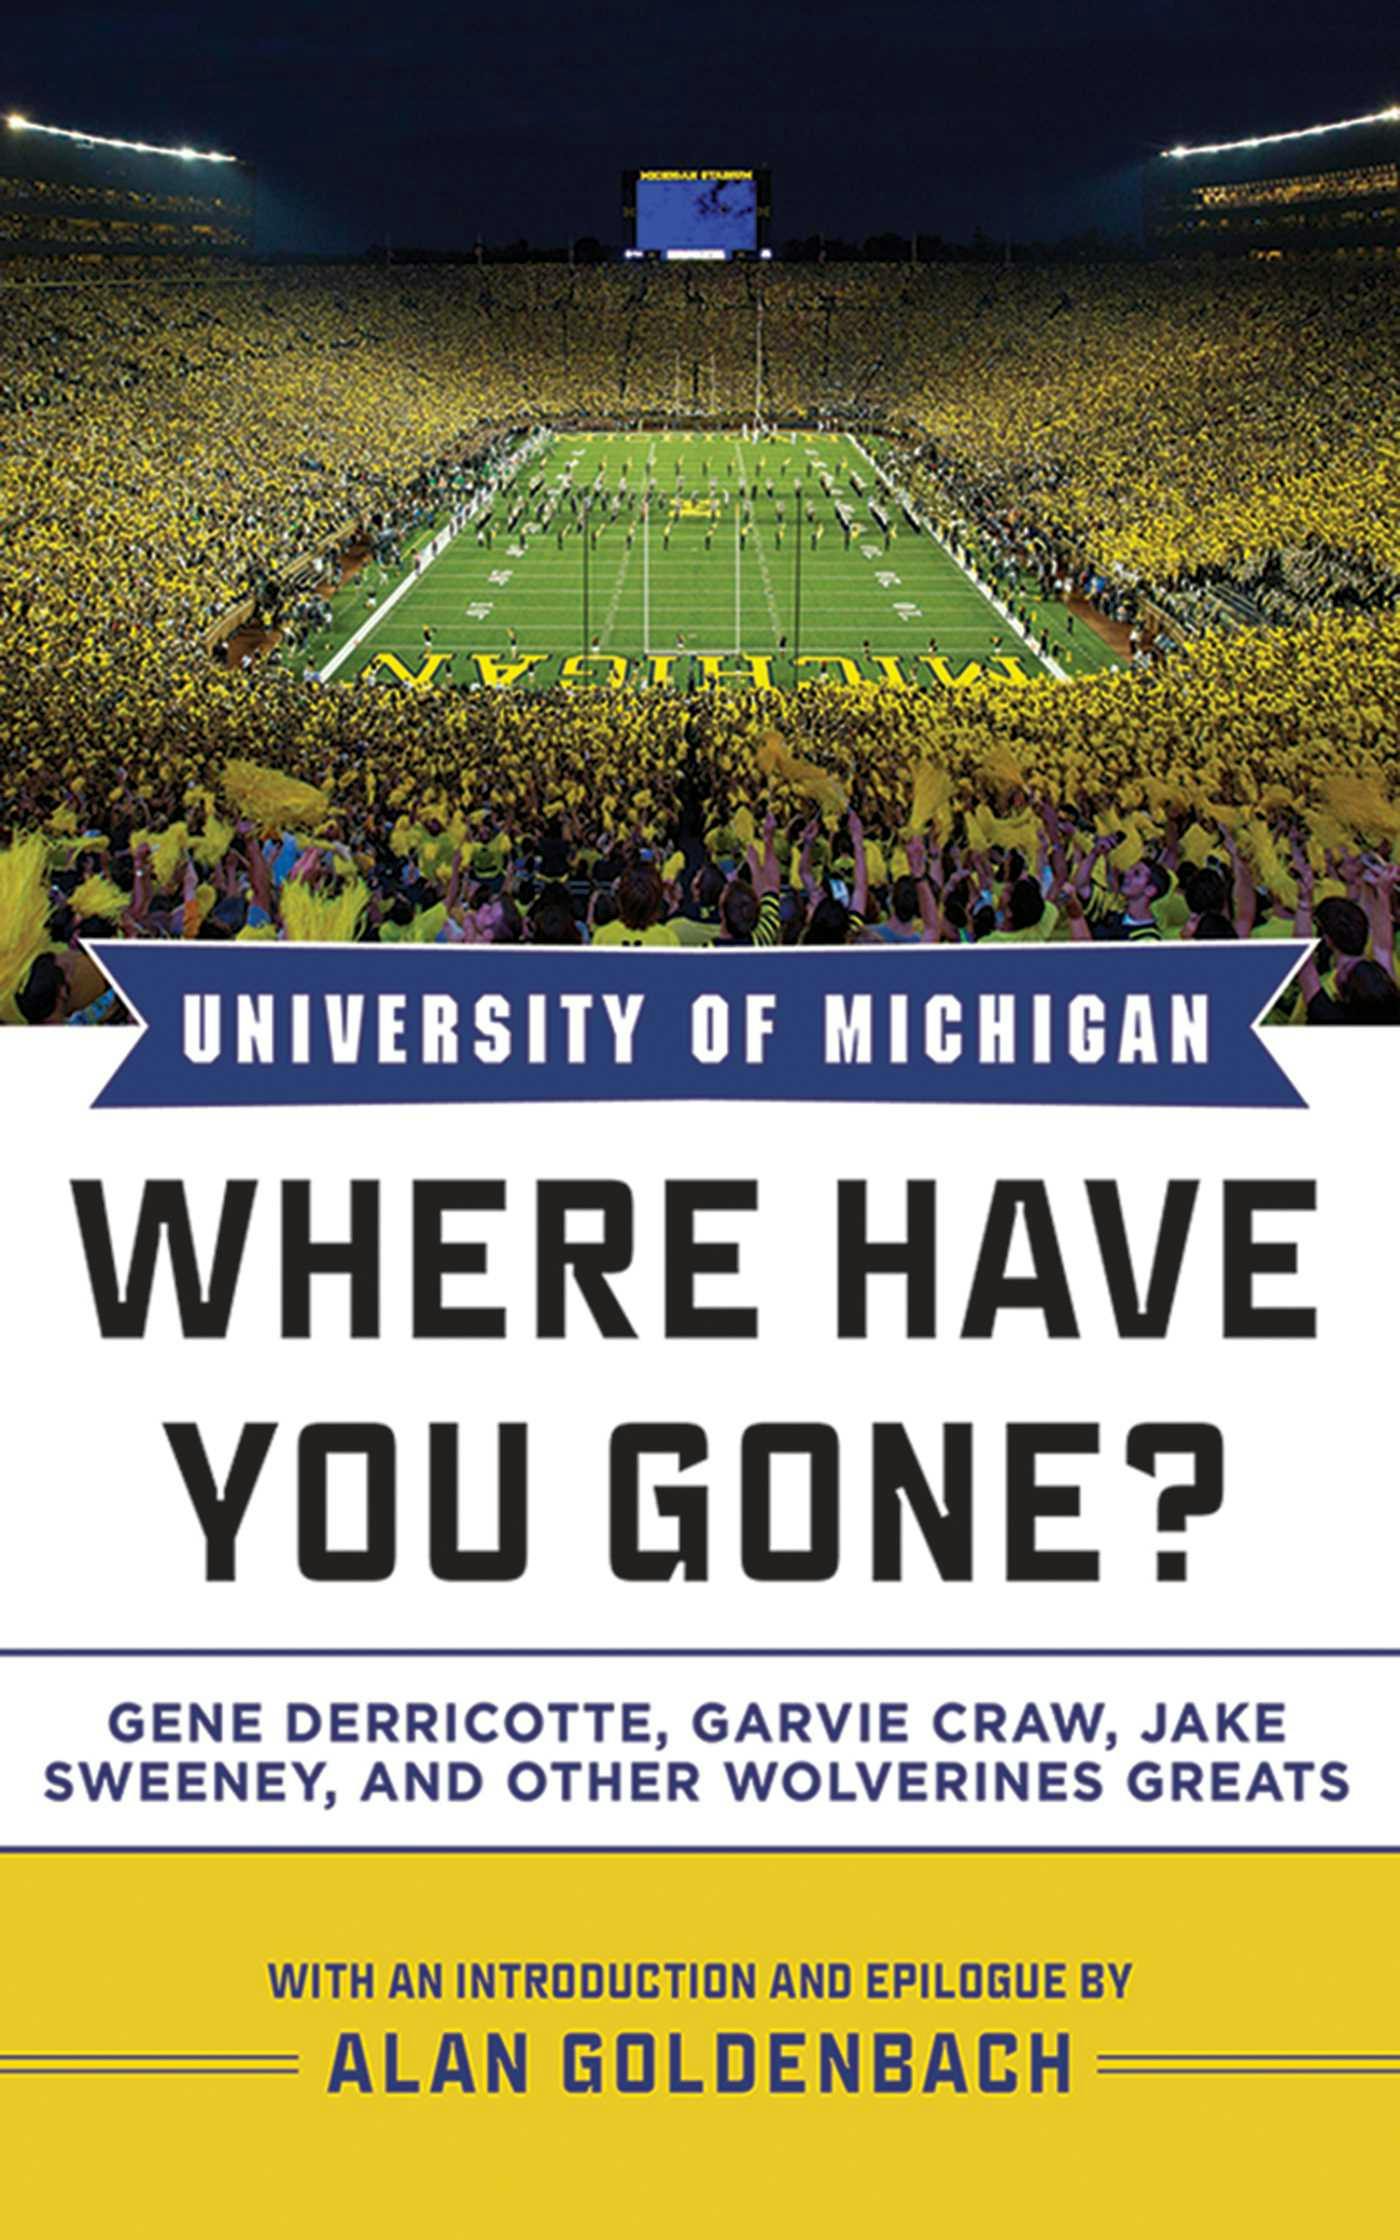 University of Michigan: Where Have You Gone? Gene Derricotte, Garvie Craw, Jake Sweeney, and Other Wolverine Greats - undefined